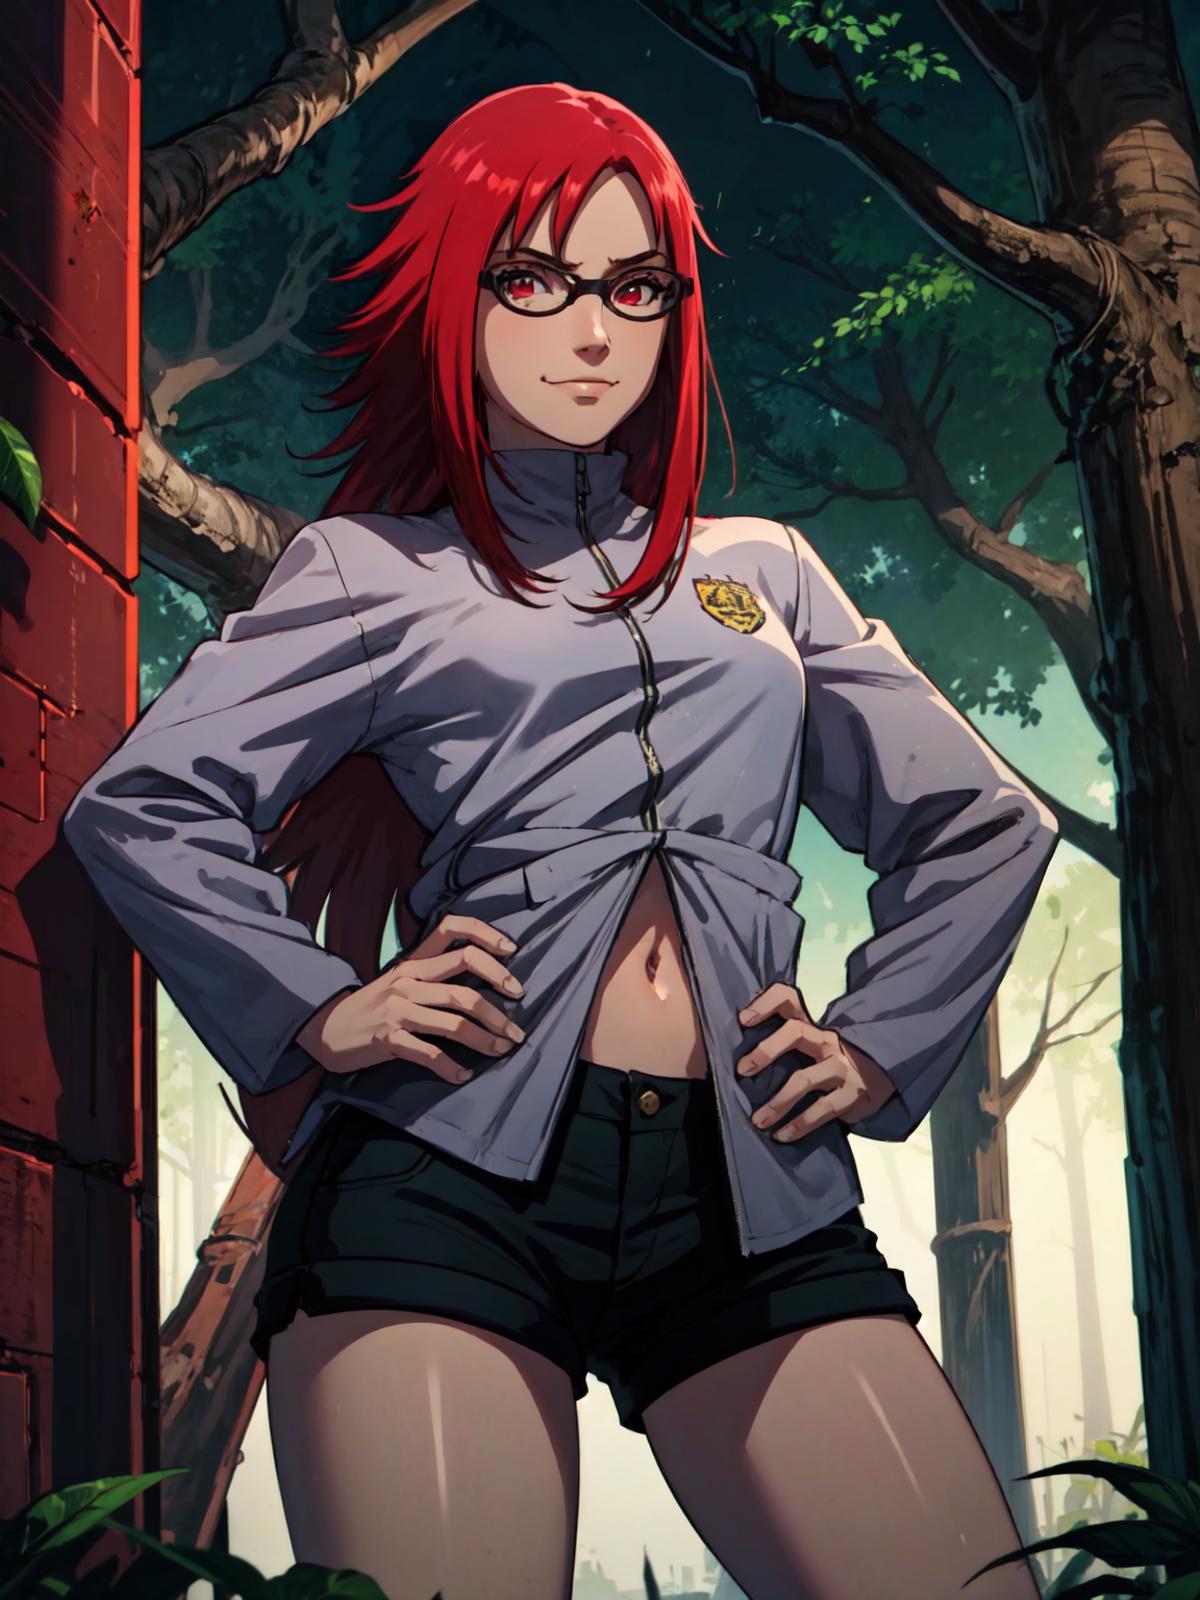 A cartoon girl with red hair and glasses posing confidently in a white jacket and black shorts.